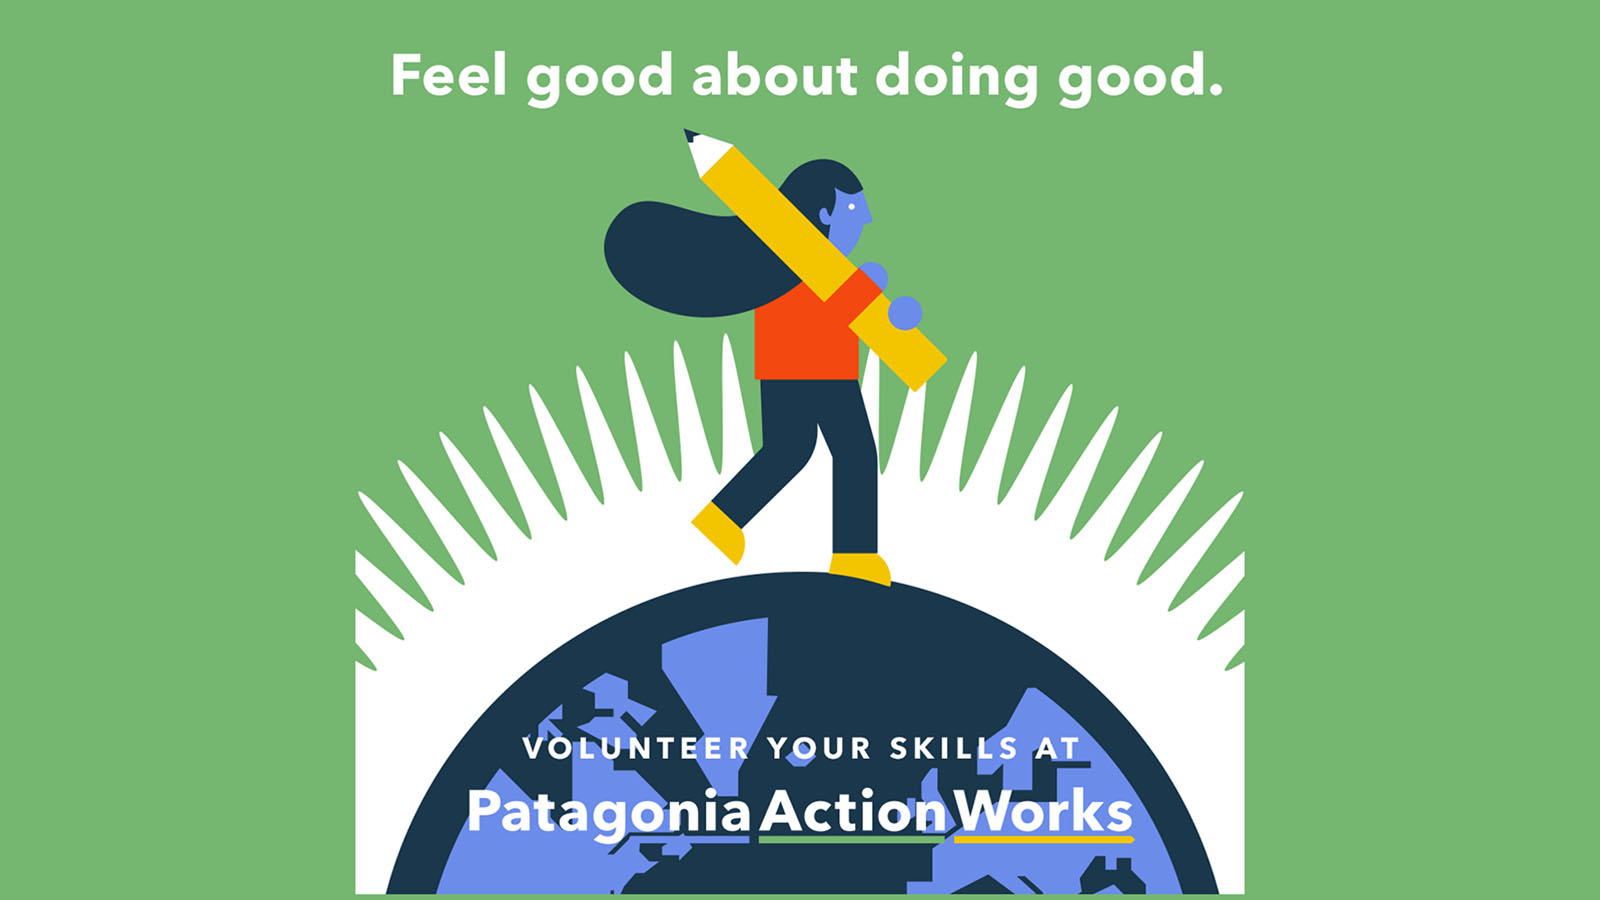 UK Volunteering Opportunities: Patagonia "Skills for Action" Session & Action Works - Boardsport SOURCE